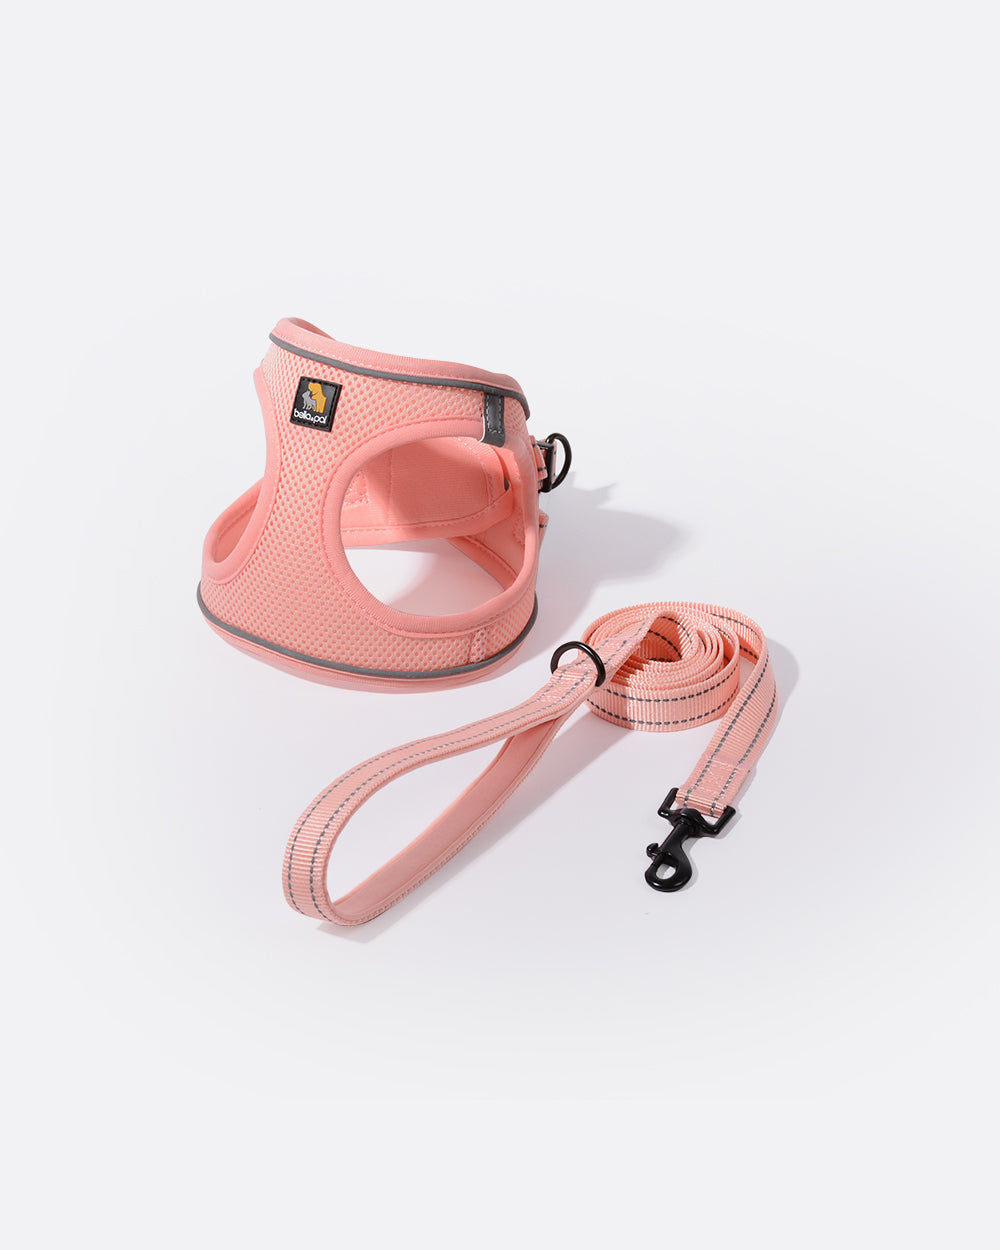 OxyMesh Step-in Harness and Leash Set - Coral Pink